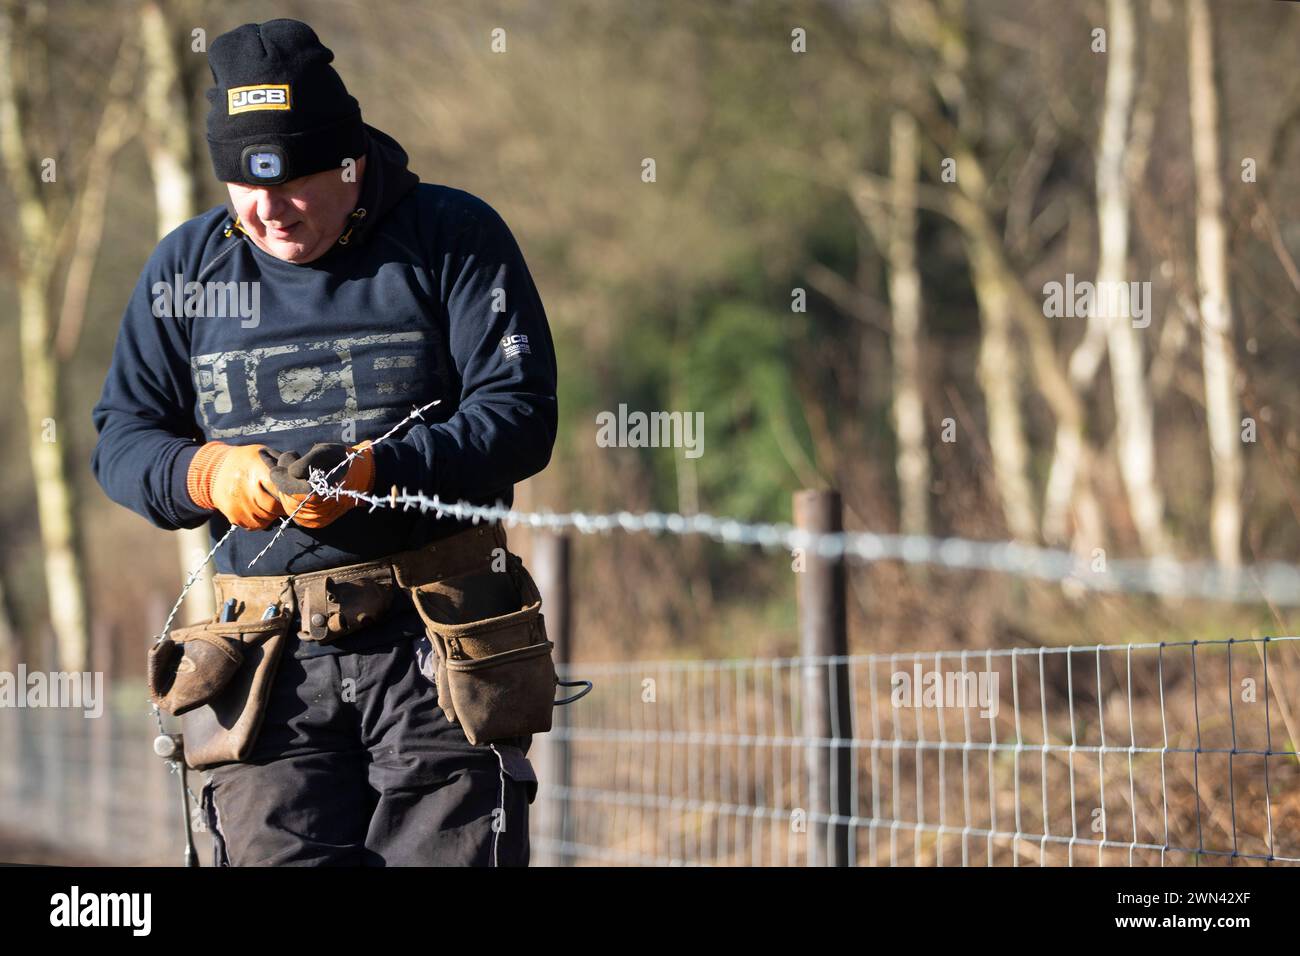 13/01/22   A fencing contractor wears JCB workwear clothing as he puts up a new fence on a frosty morning in the Churnet Valley, Staffordshire.  All R Stock Photo